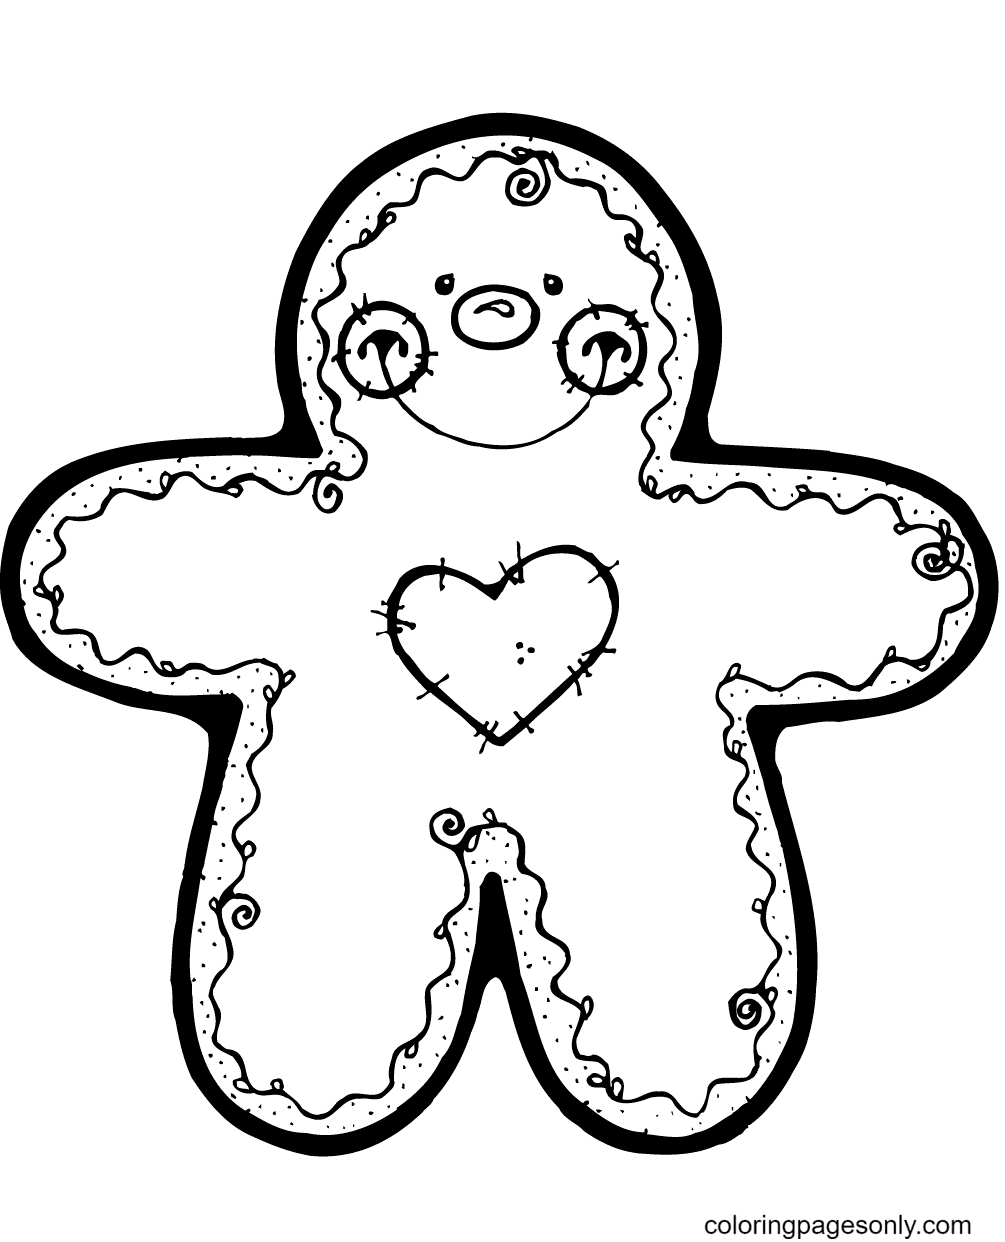 Gingerbread Man With a Heart Full of Thorns Coloring Page